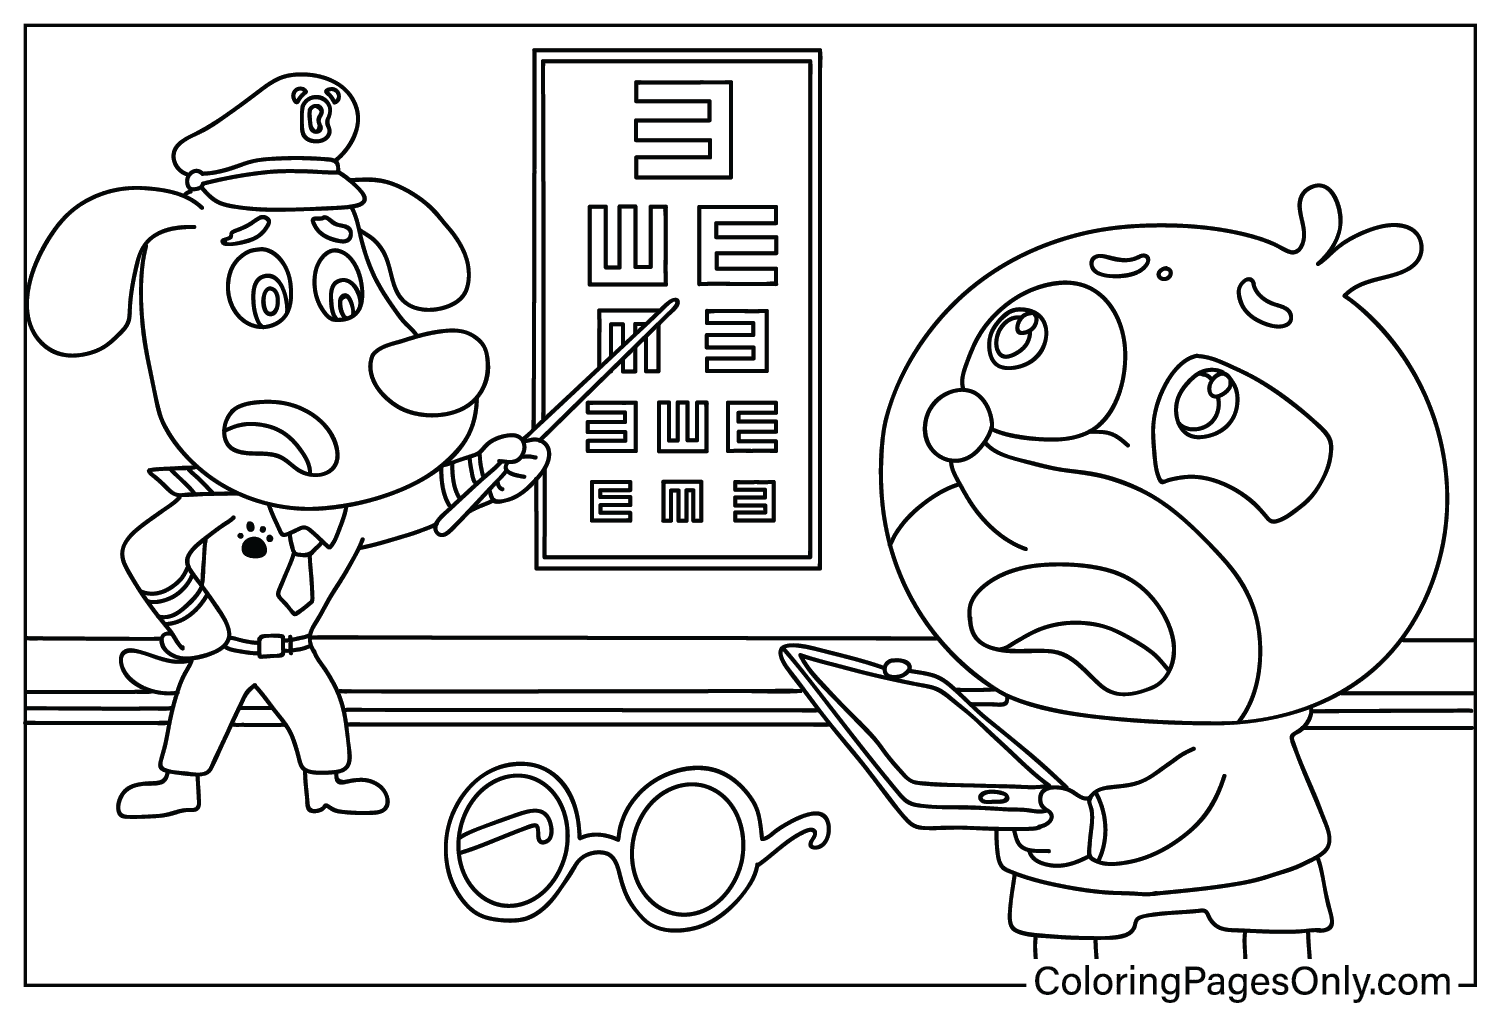 Safety Sheriff Labrador Coloring Page Free from Safety Sheriff Labrador